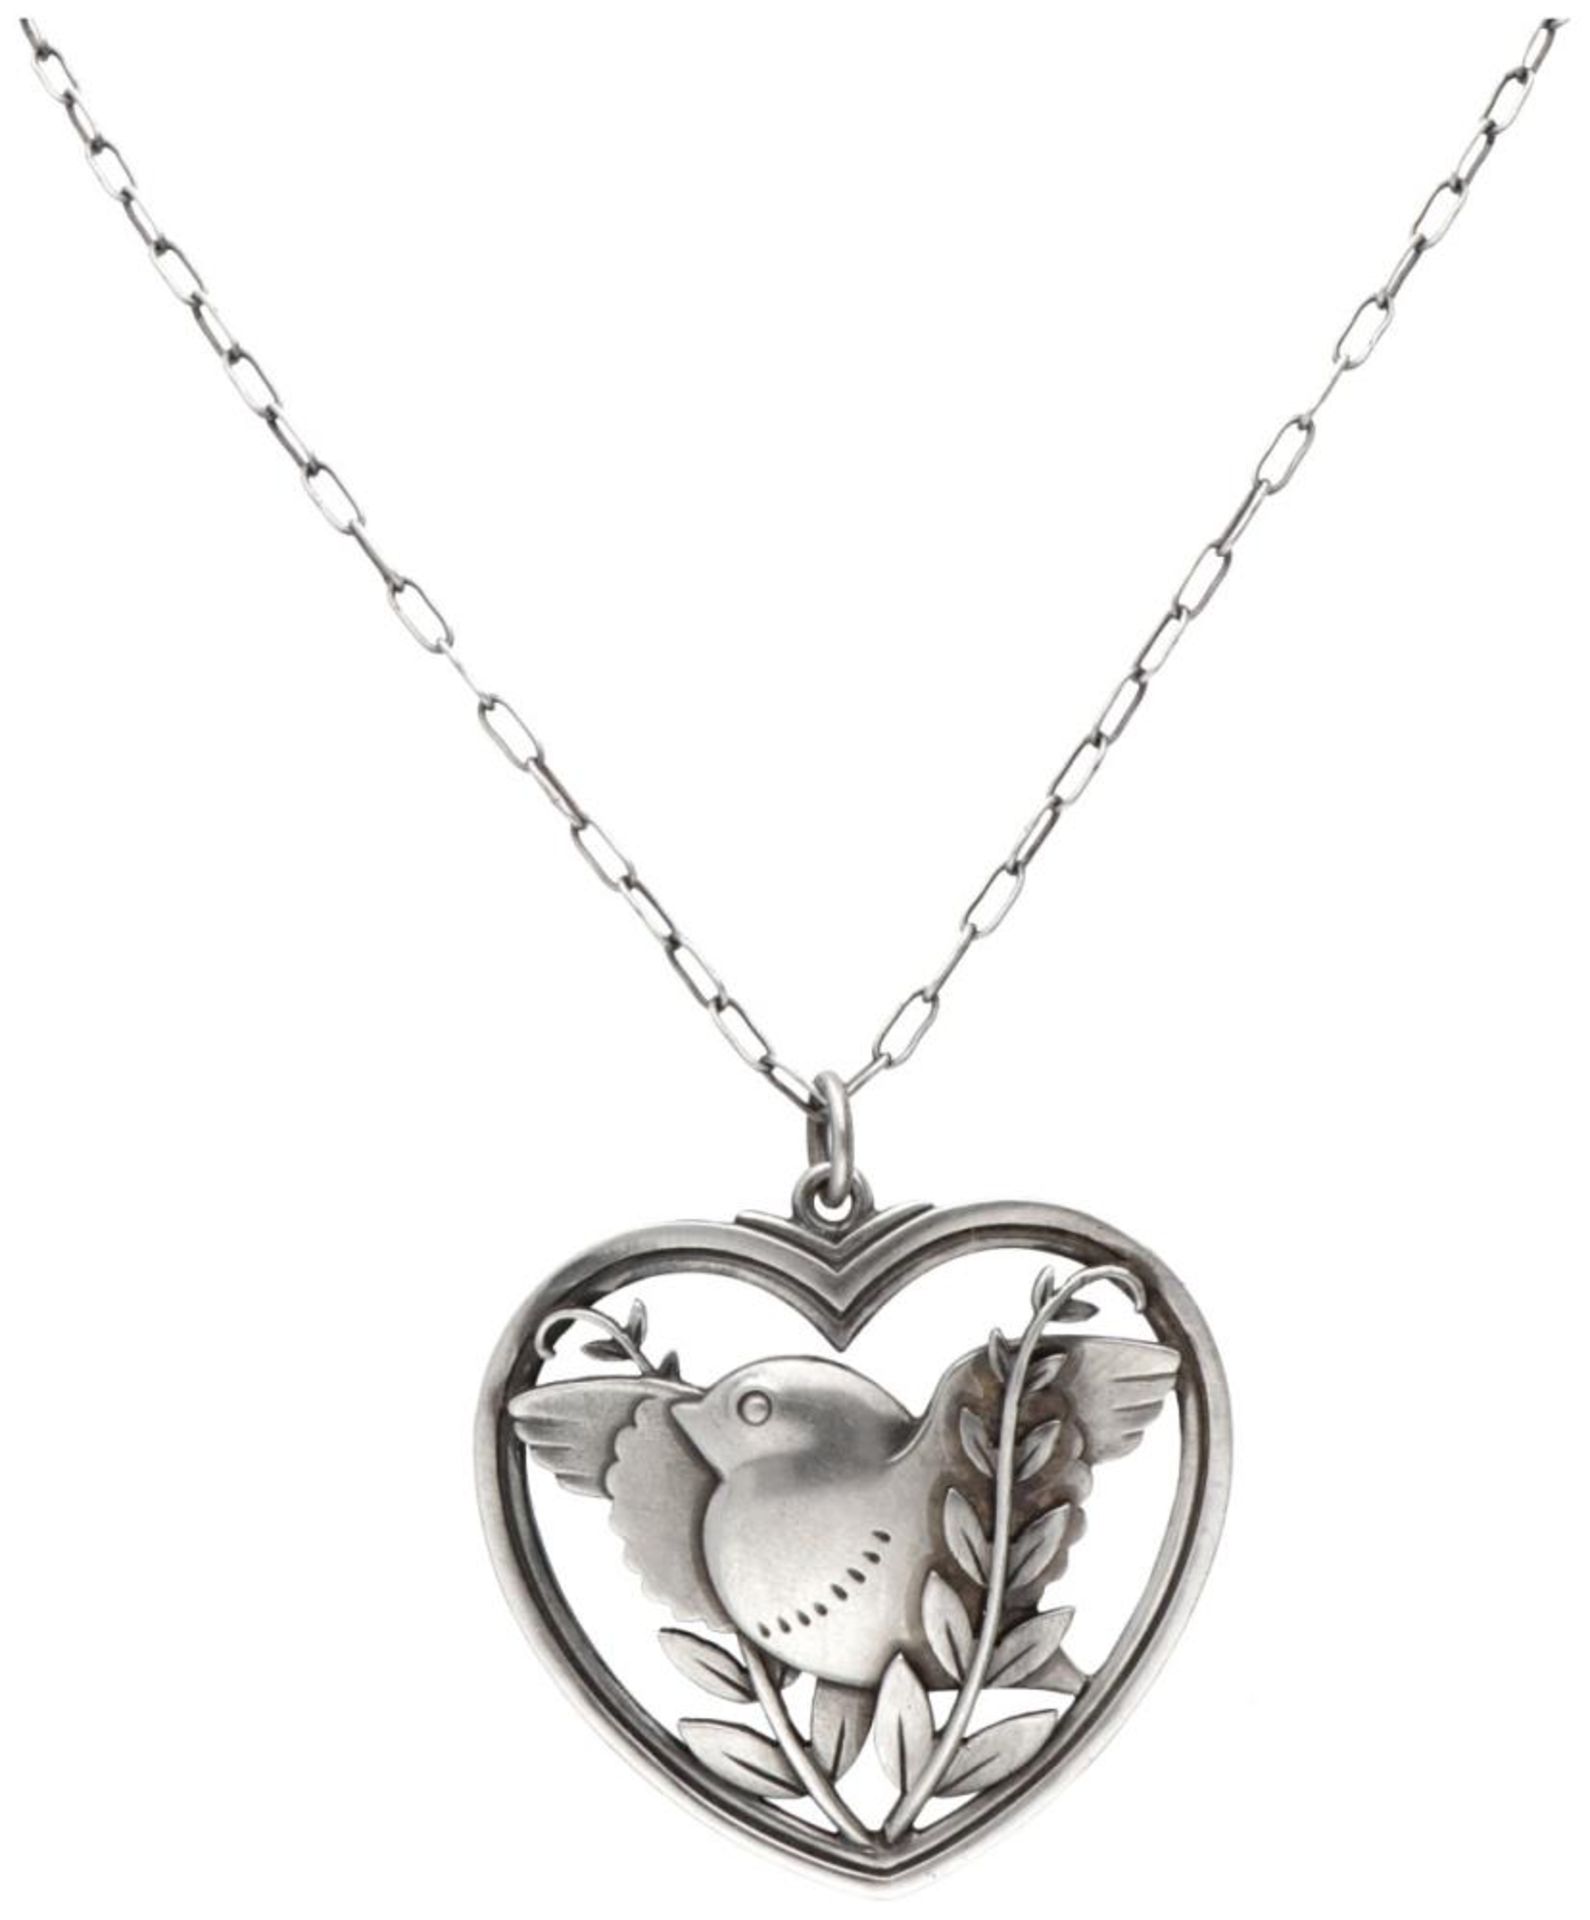 Sterling silver necklace with no.97 'Robin in a Heart' pendant by Arno Malinowski for Georg Jensen.